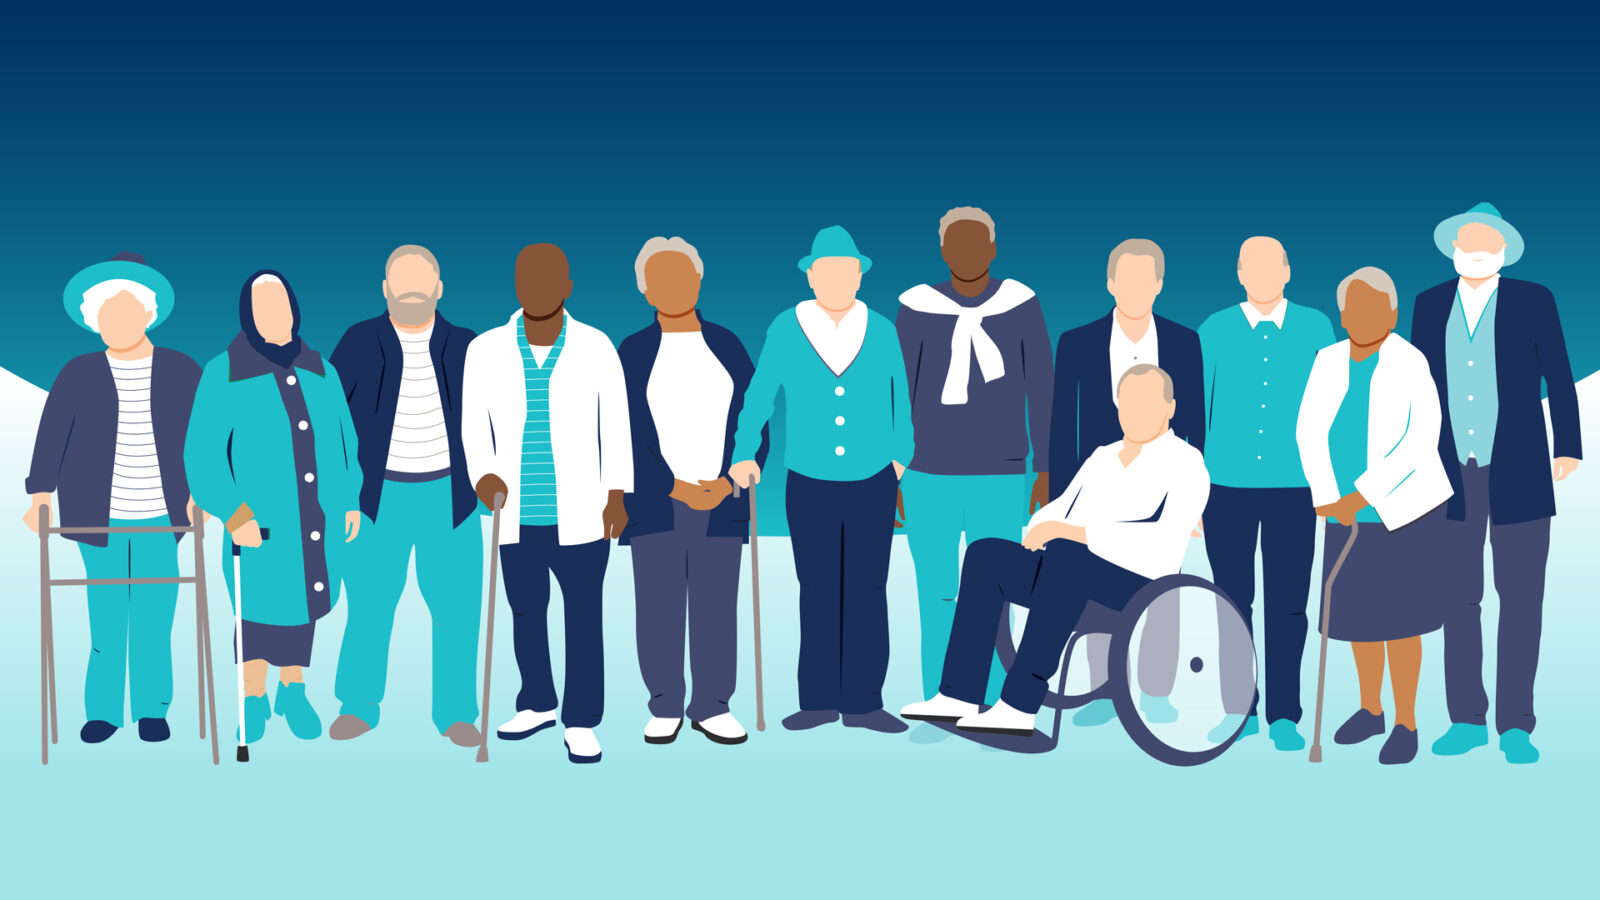 Image that represents older people and people with disabilities